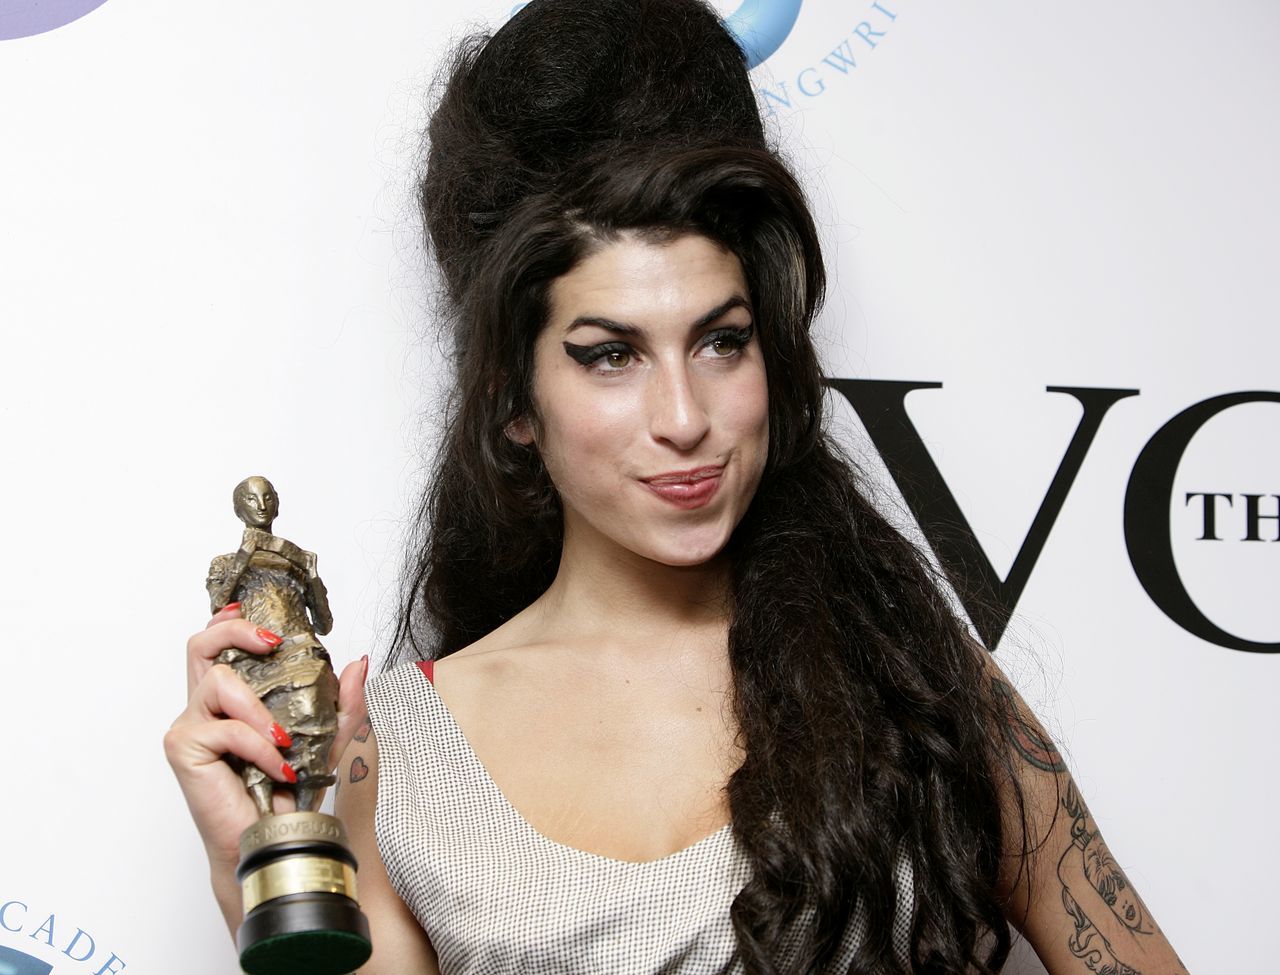 Winehouse after winning the Best Contemporary song award for her song 'Rehab' at the Ivor Novello Awards. (PA Media/Yui Mok)